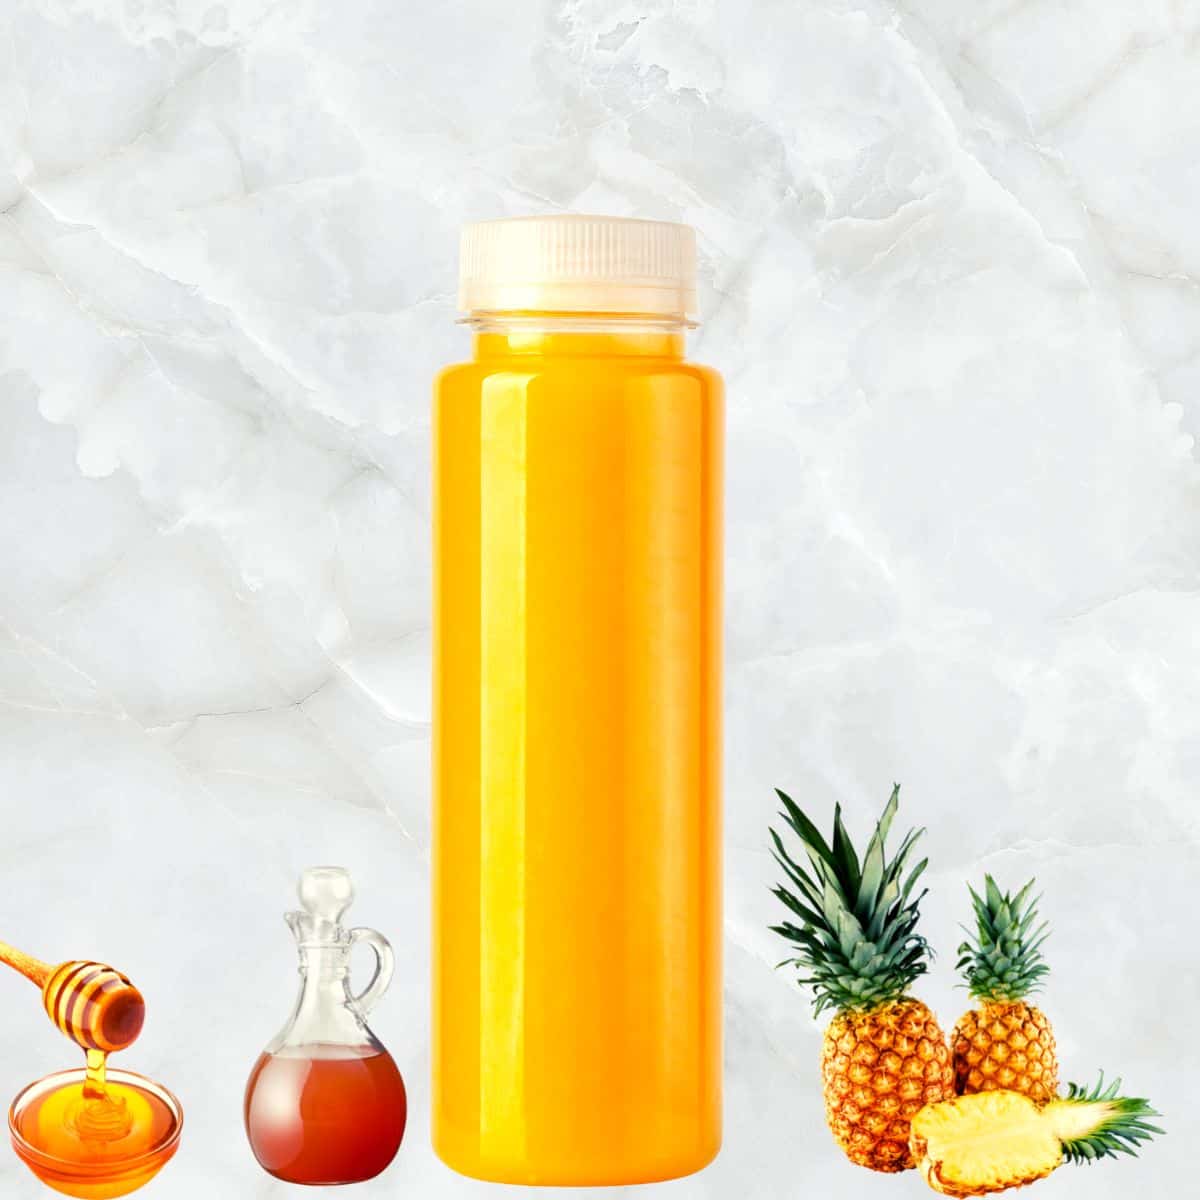 pineapple juice honey and apple cider vinegar in a bottle with ACV, honey and pineapple in the image